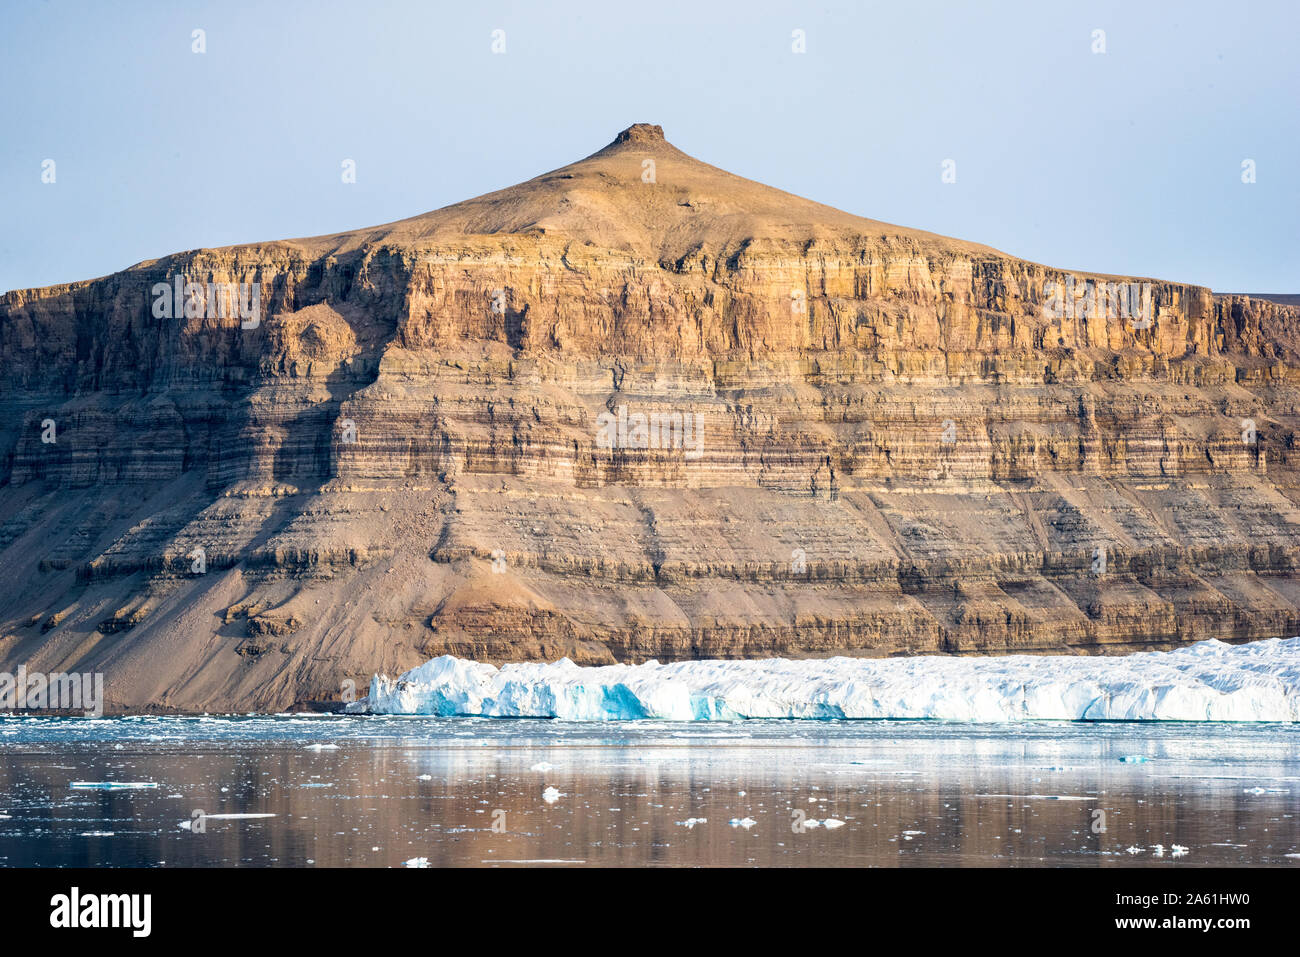 Devon Island and its glacier as seen from Croker Bay along the Northwest Passage in Arctic Canada Stock Photo